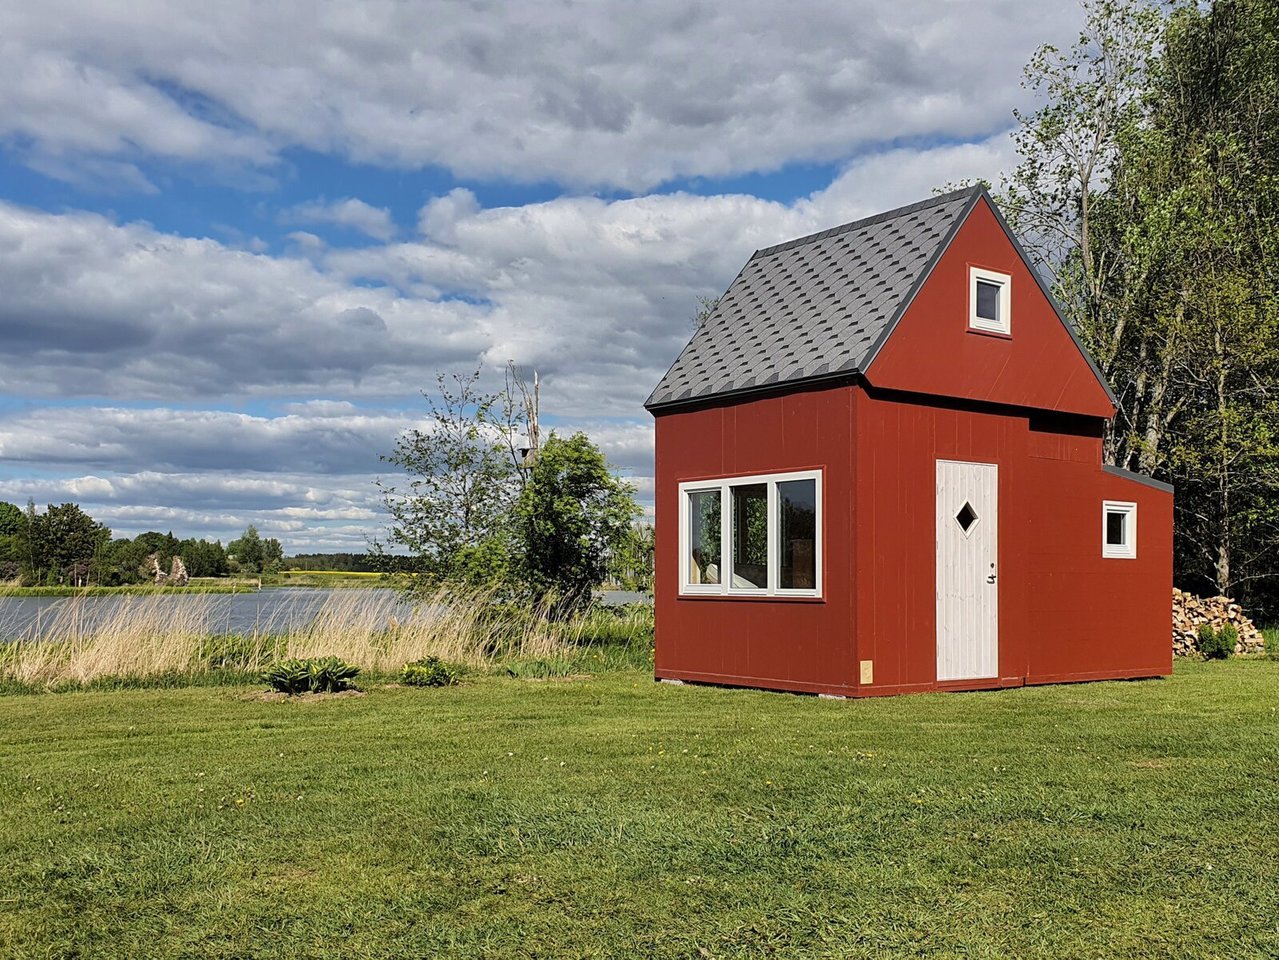 This Foldable, $23K Tiny Cabin Pops Up in Less Than 3 Hours